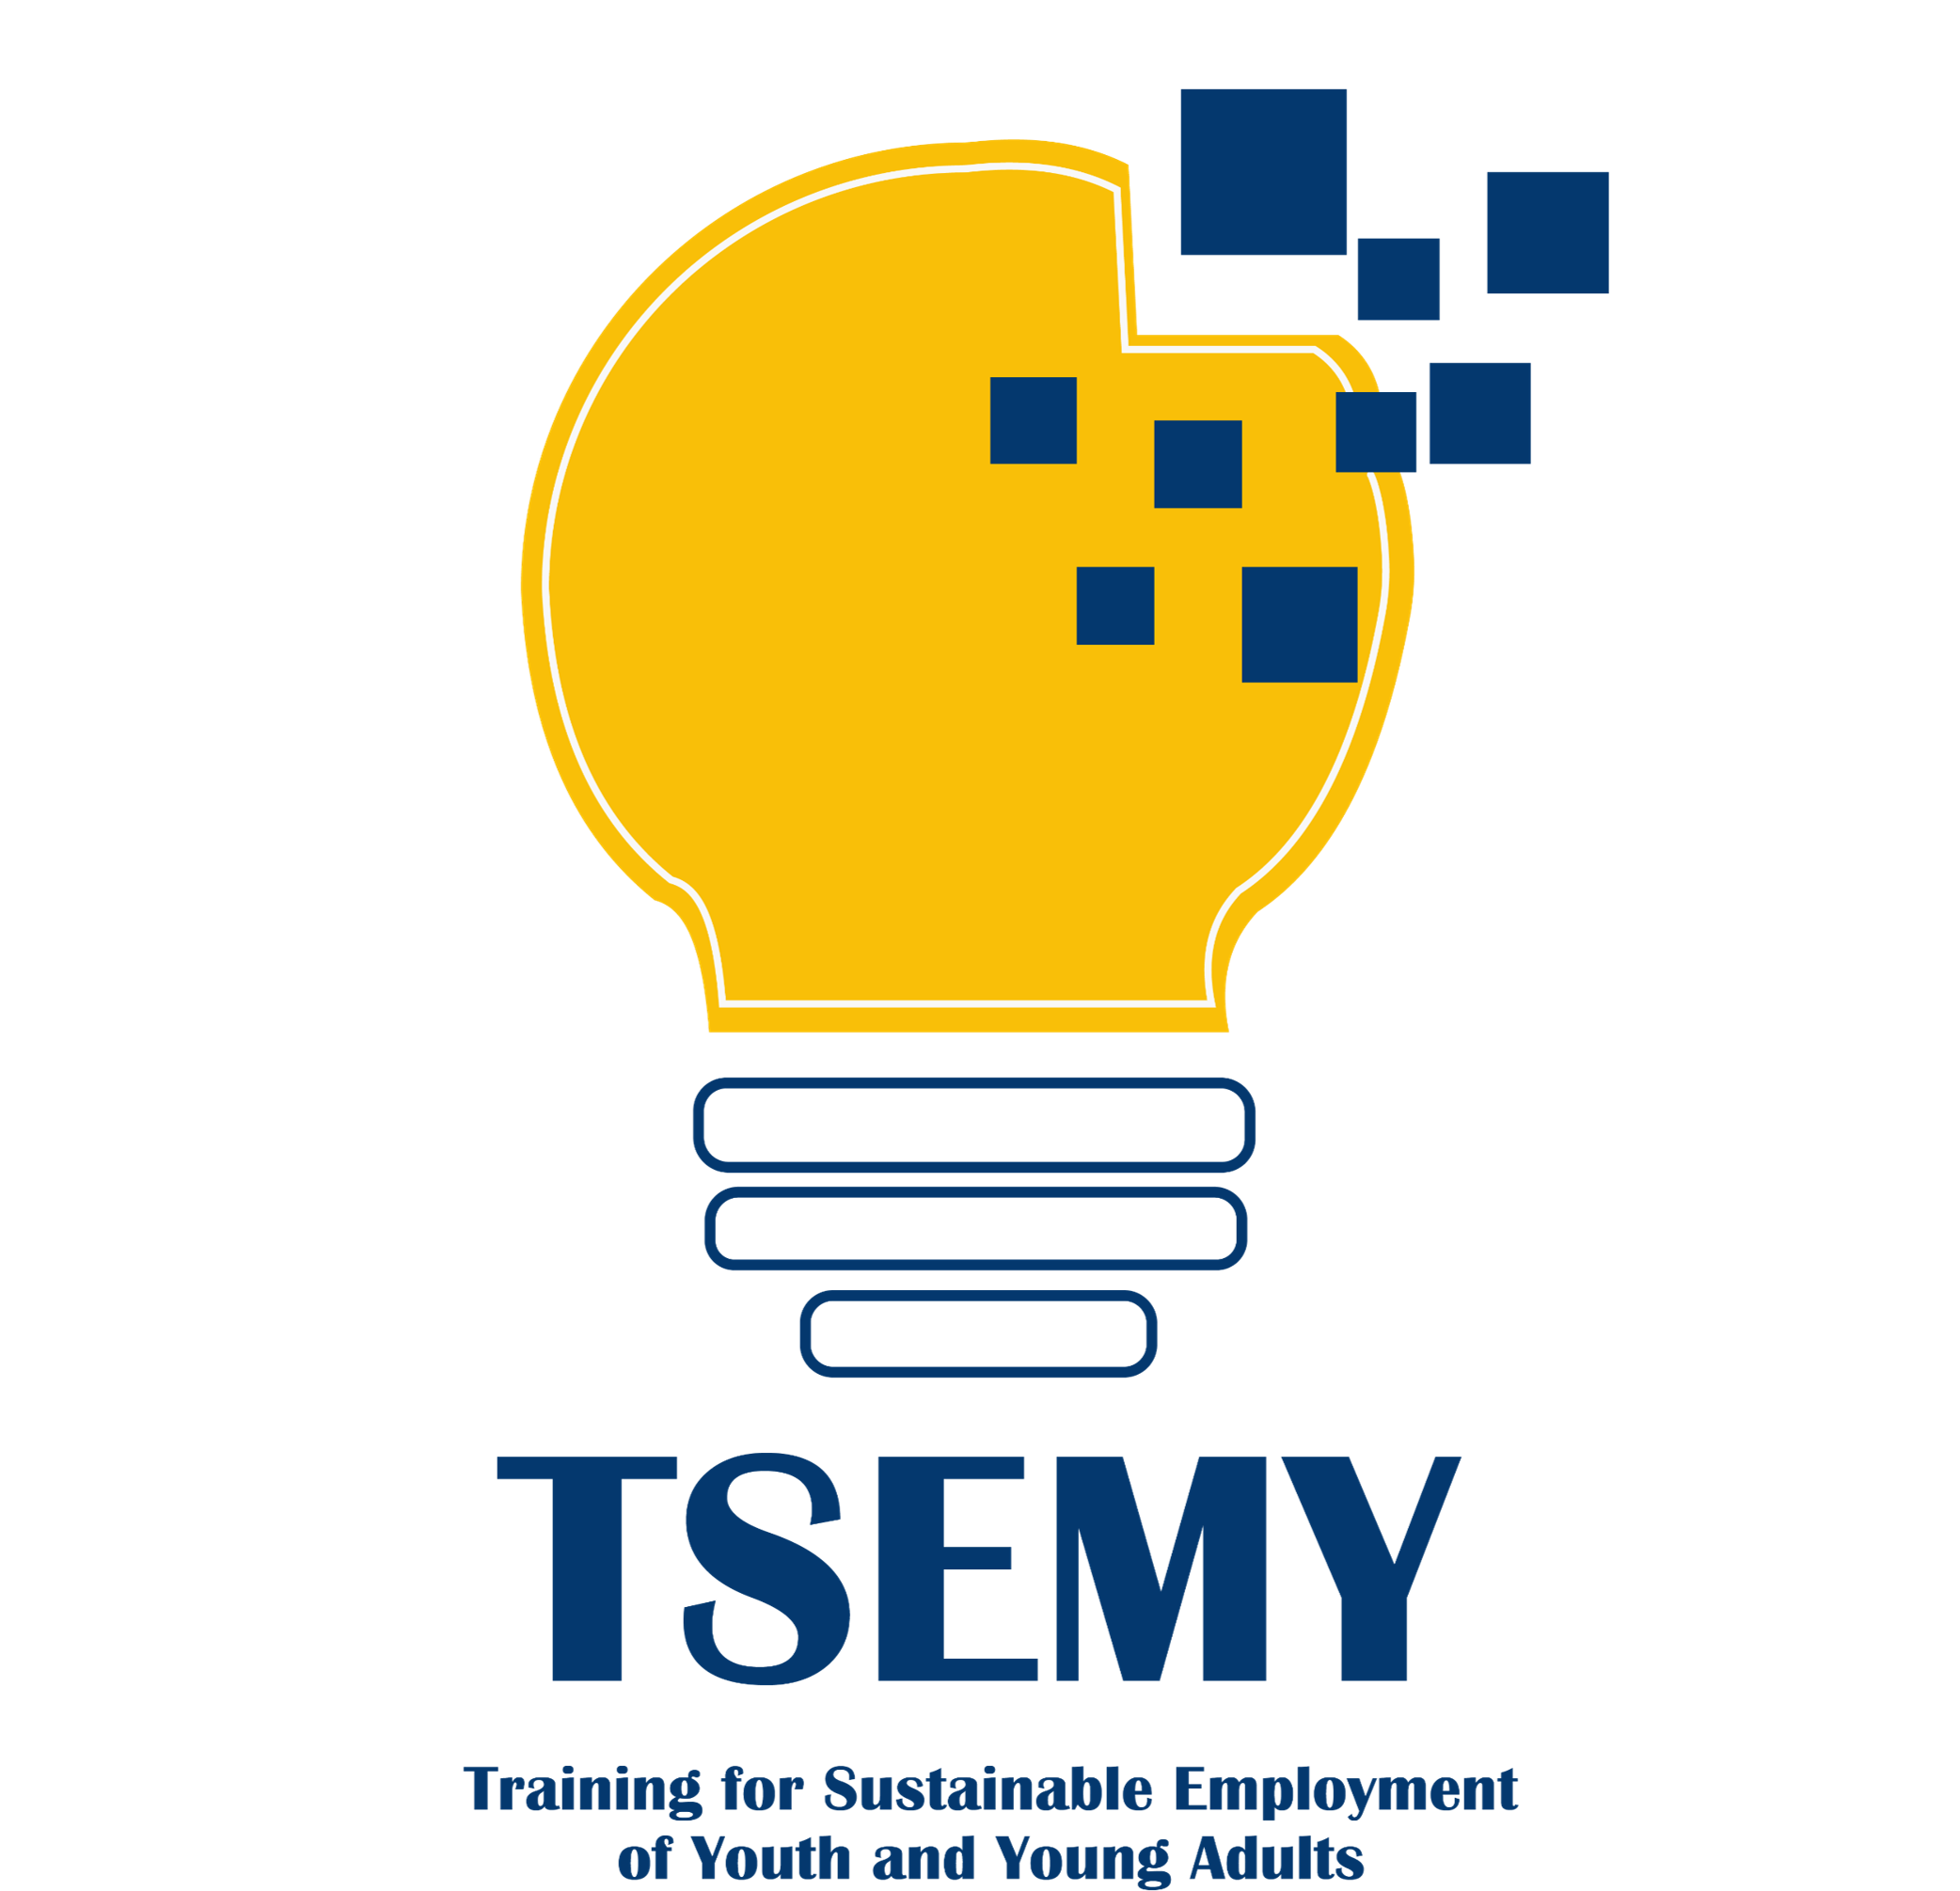 TSEMY – Training for Sustainable Employment of Youth and Young Adults